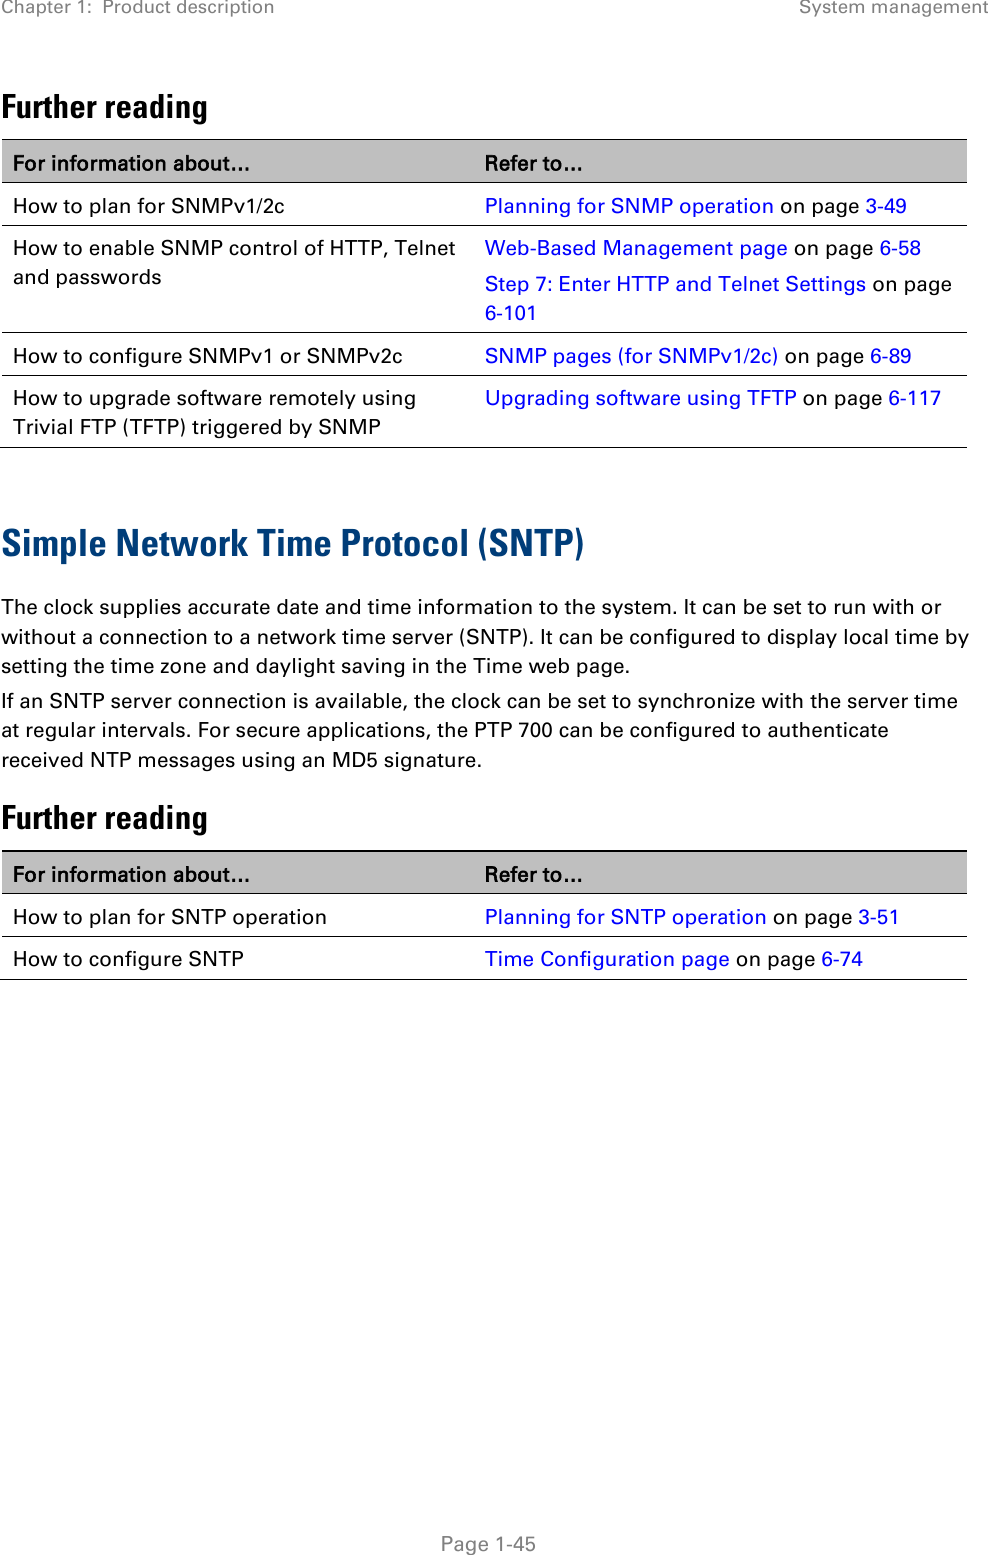 Chapter 1:  Product description System management  Further reading For information about… Refer to… How to plan for SNMPv1/2c Planning for SNMP operation on page 3-49 How to enable SNMP control of HTTP, Telnet and passwords Web-Based Management page on page 6-58 Step 7: Enter HTTP and Telnet Settings on page 6-101 How to configure SNMPv1 or SNMPv2c SNMP pages (for SNMPv1/2c) on page 6-89 How to upgrade software remotely using Trivial FTP (TFTP) triggered by SNMP Upgrading software using TFTP on page 6-117  Simple Network Time Protocol (SNTP) The clock supplies accurate date and time information to the system. It can be set to run with or without a connection to a network time server (SNTP). It can be configured to display local time by setting the time zone and daylight saving in the Time web page. If an SNTP server connection is available, the clock can be set to synchronize with the server time at regular intervals. For secure applications, the PTP 700 can be configured to authenticate received NTP messages using an MD5 signature. Further reading For information about… Refer to… How to plan for SNTP operation Planning for SNTP operation on page 3-51 How to configure SNTP Time Configuration page on page 6-74      Page 1-45 